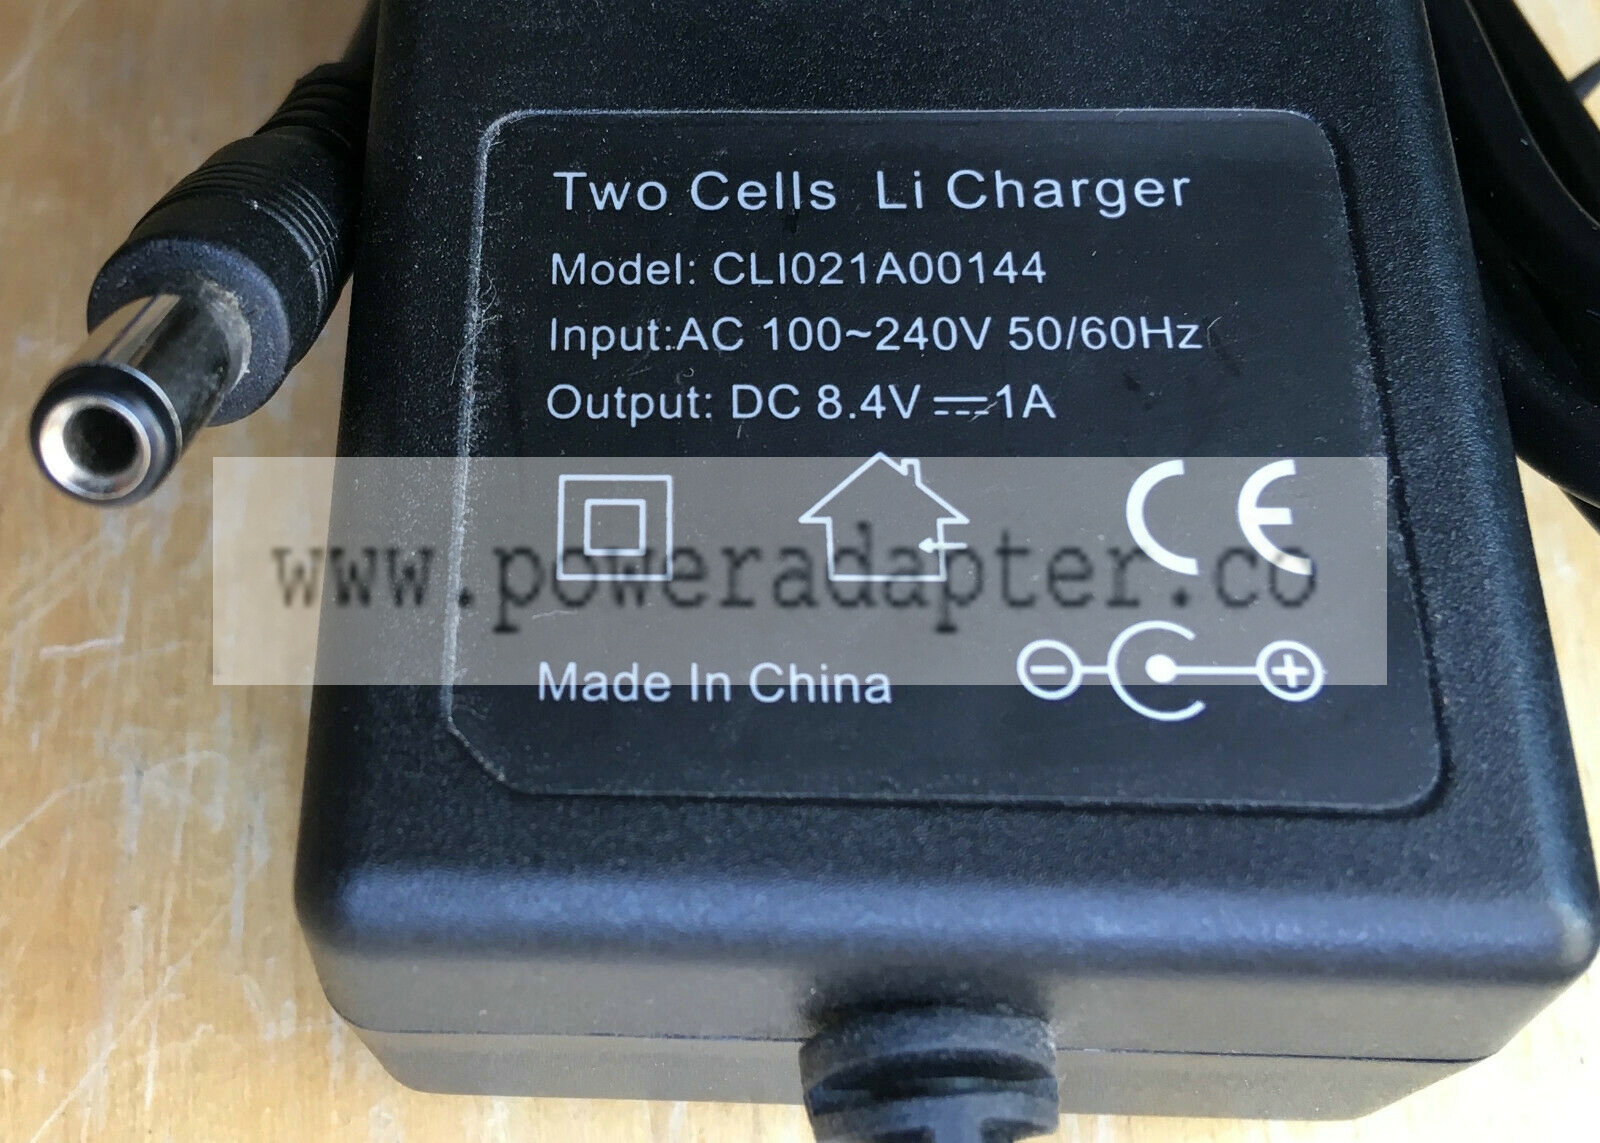 Two Cells LI 8.4V DC 1A Charger CLI021A00144 for Bike Light Two Cells LI 8.4V DC 1A Charger CLI021A00144 for Bike Lig - Click Image to Close